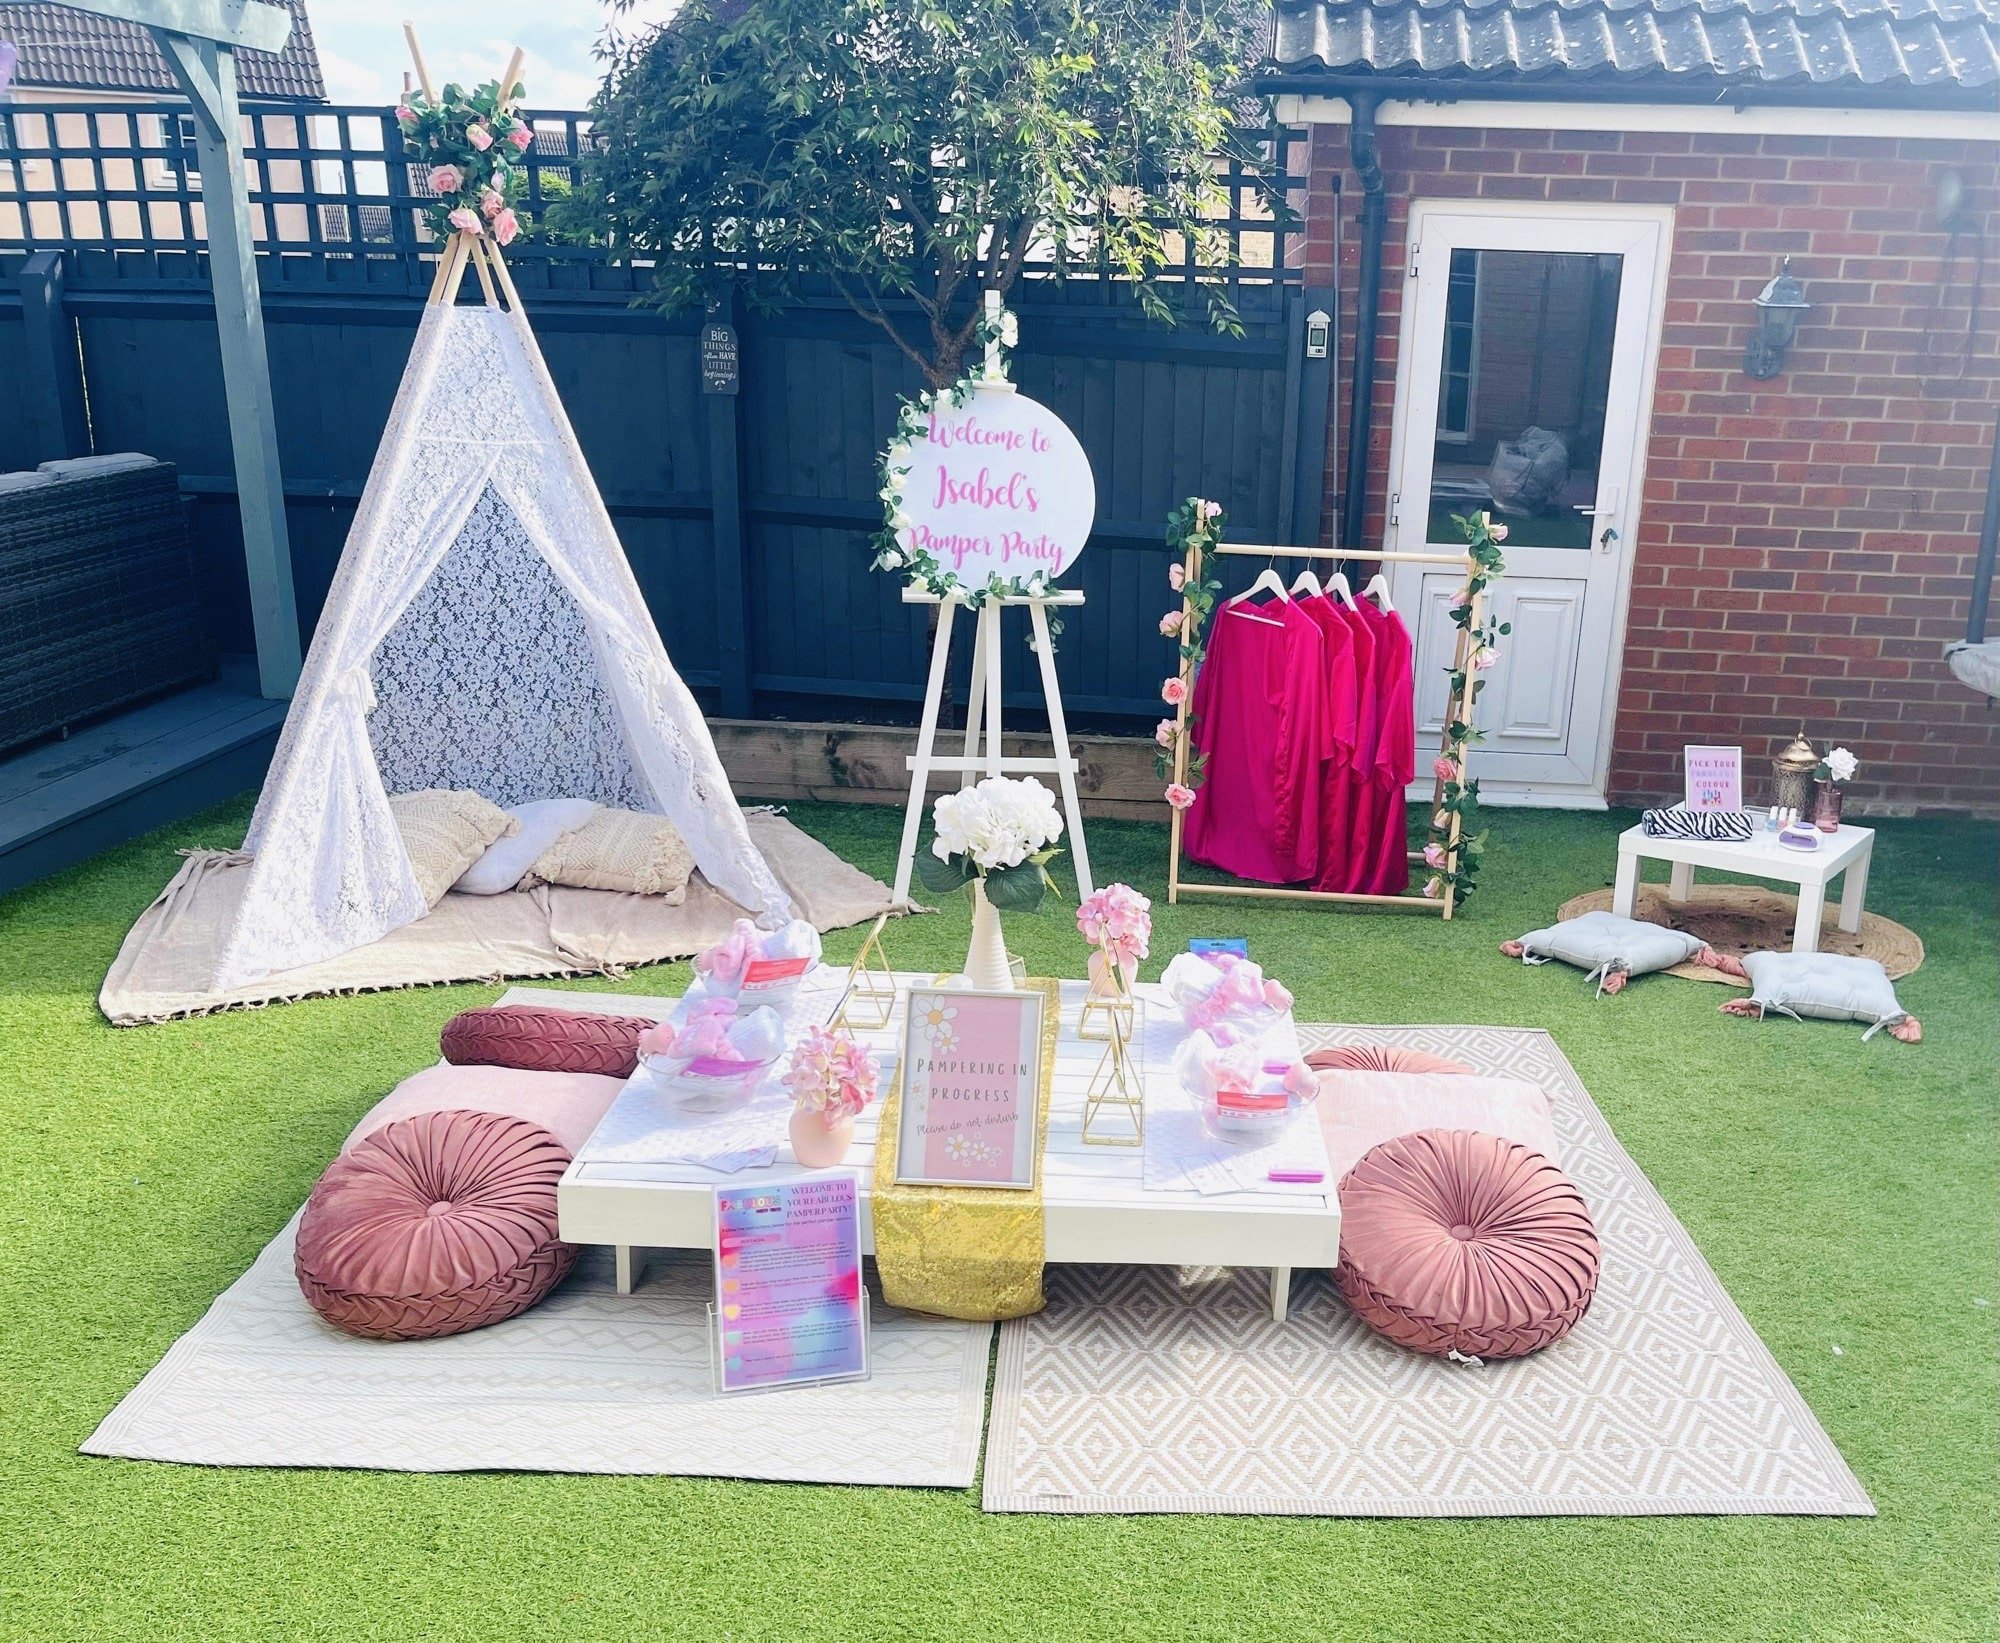 Fabulous Party Tents -  Sleepover Party Tents in Essex